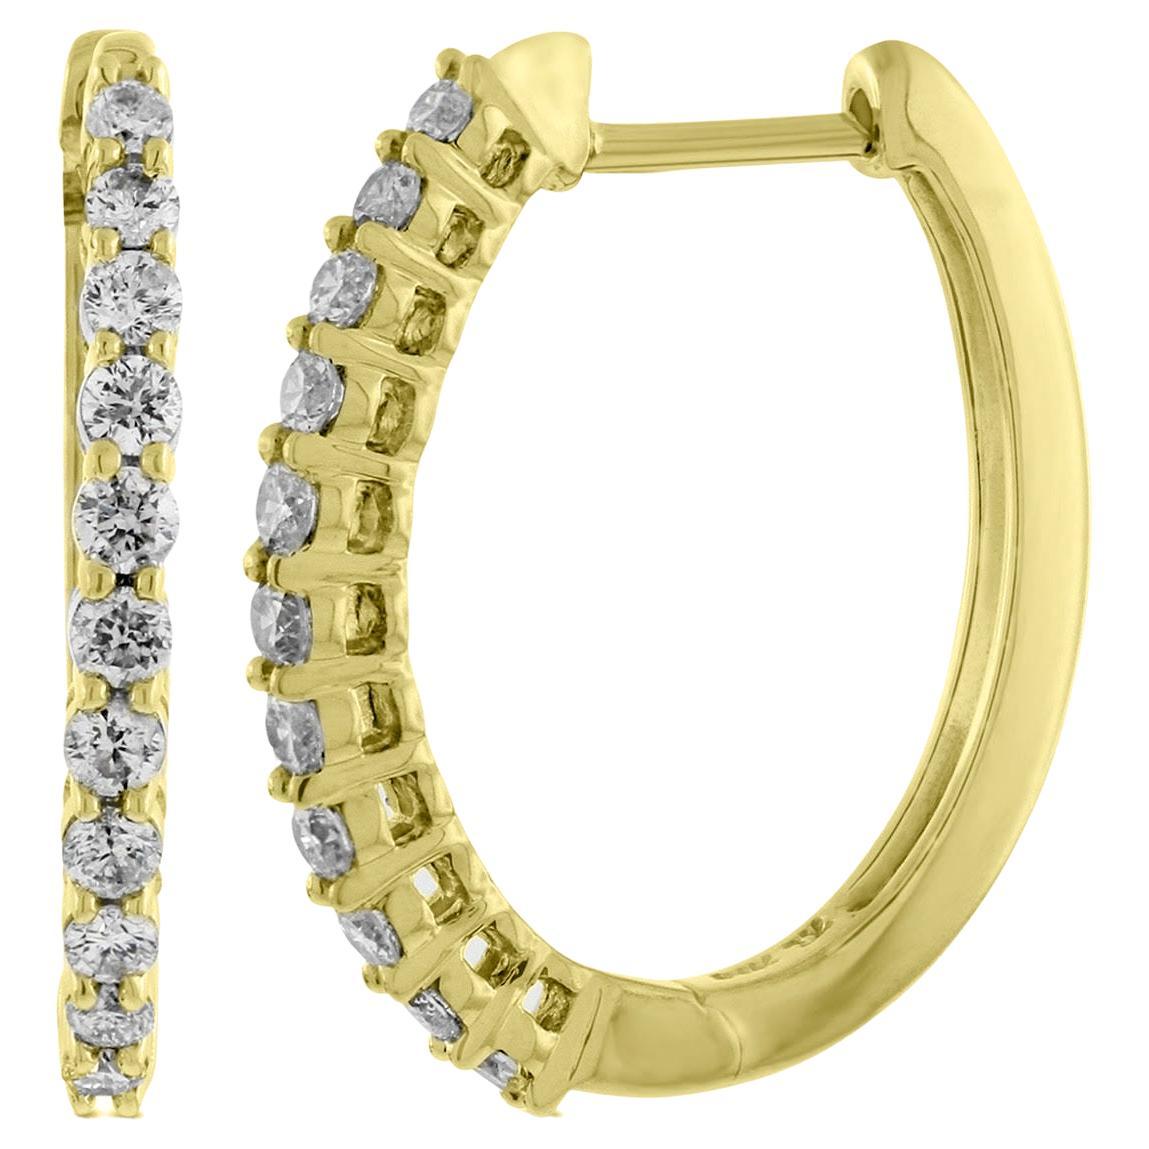  .50 Carat Total Weight Diamond Outside Oval Hoop Earrings 14K Yellow Gold		 For Sale